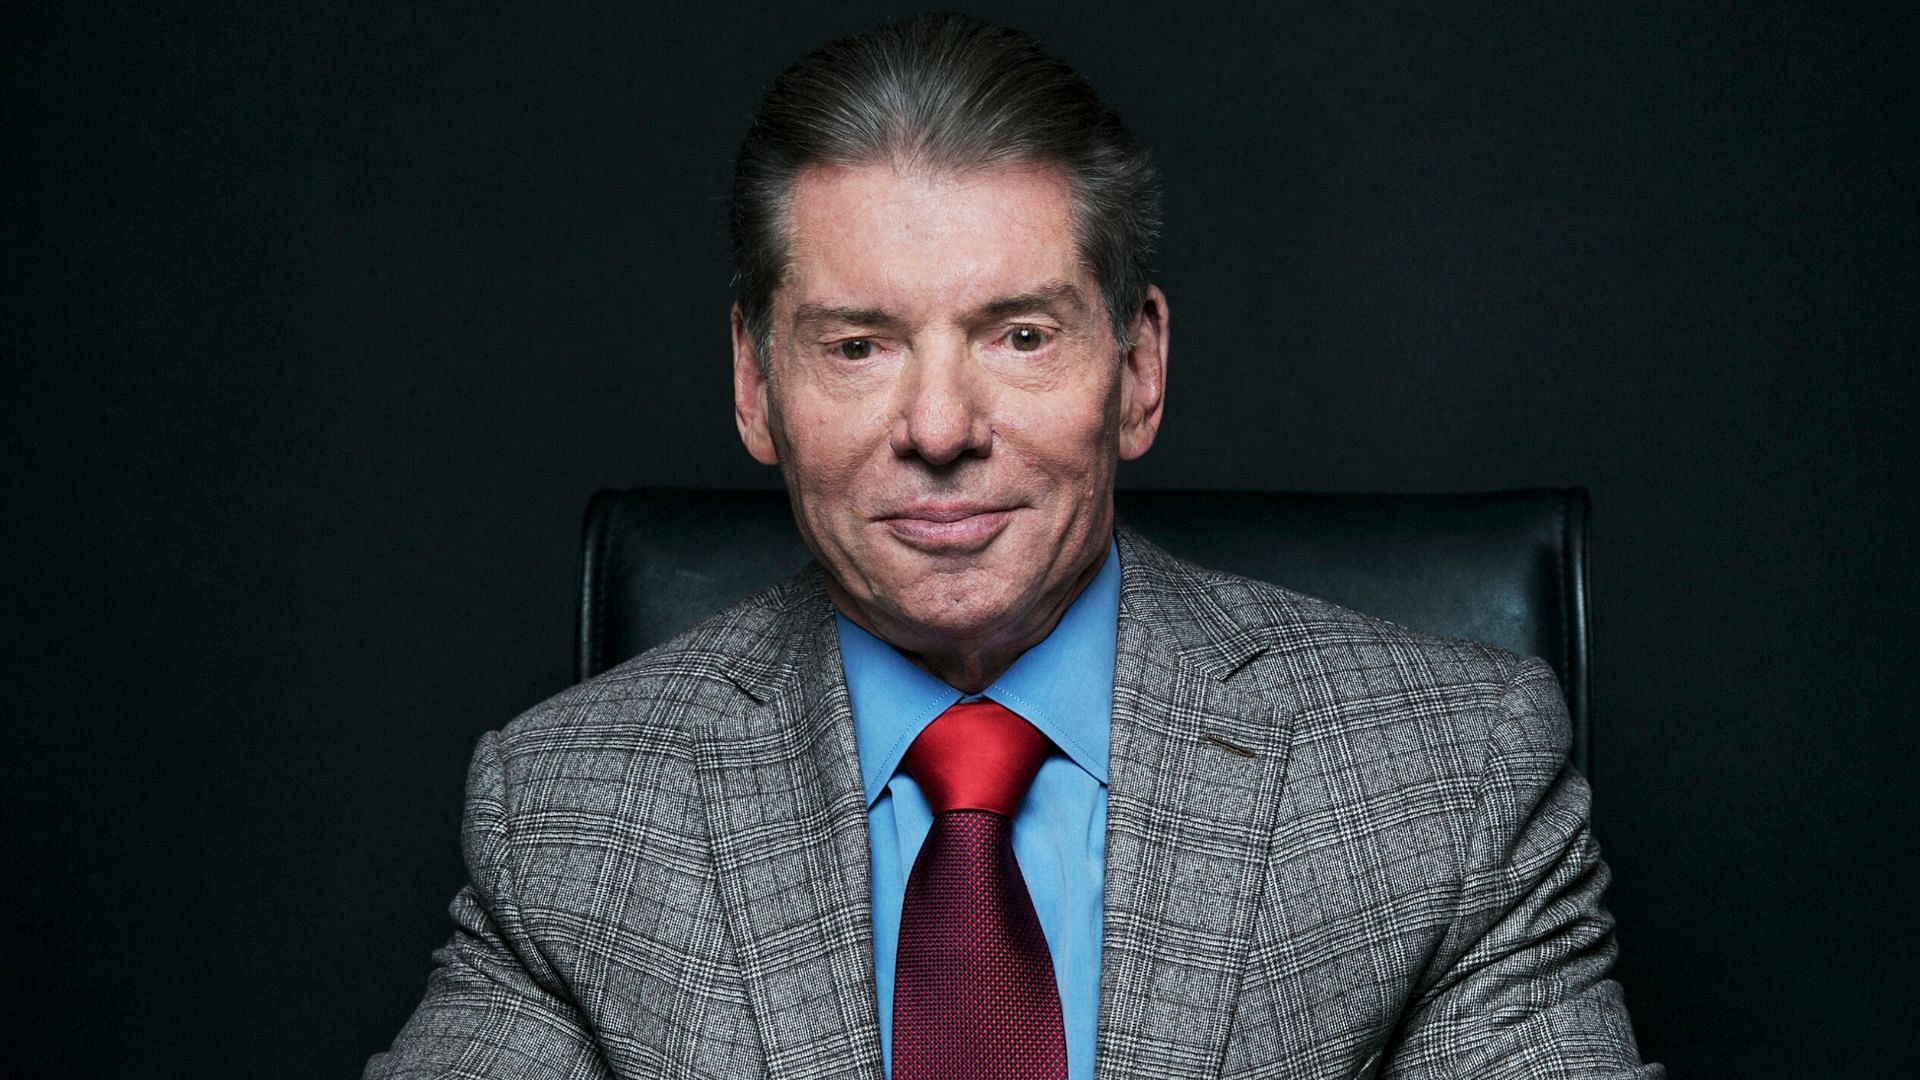 Vince McMahon has returned to a position of power in WWE